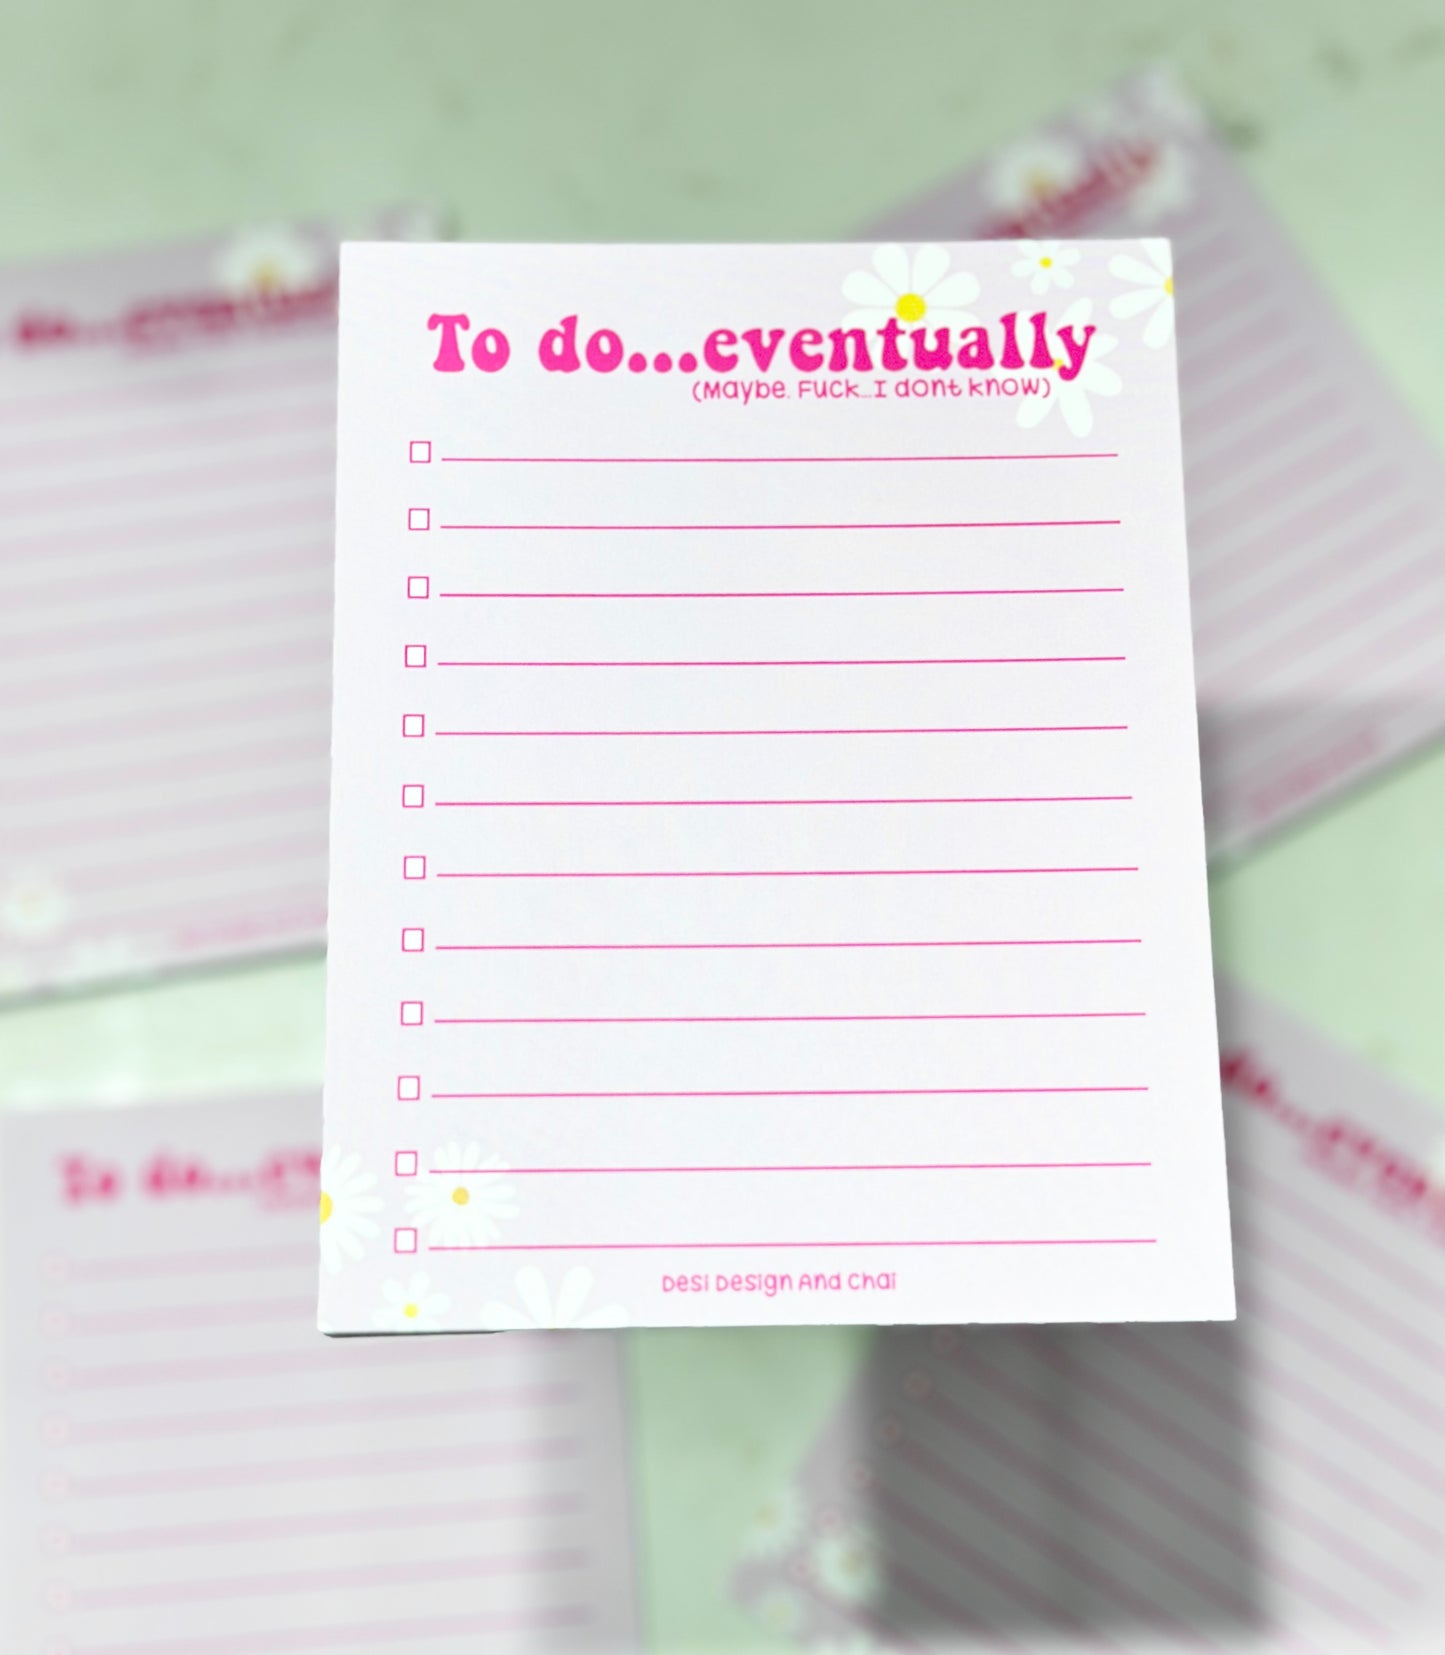 "To do eventually .. maybe .. fuck i dont know" notepad